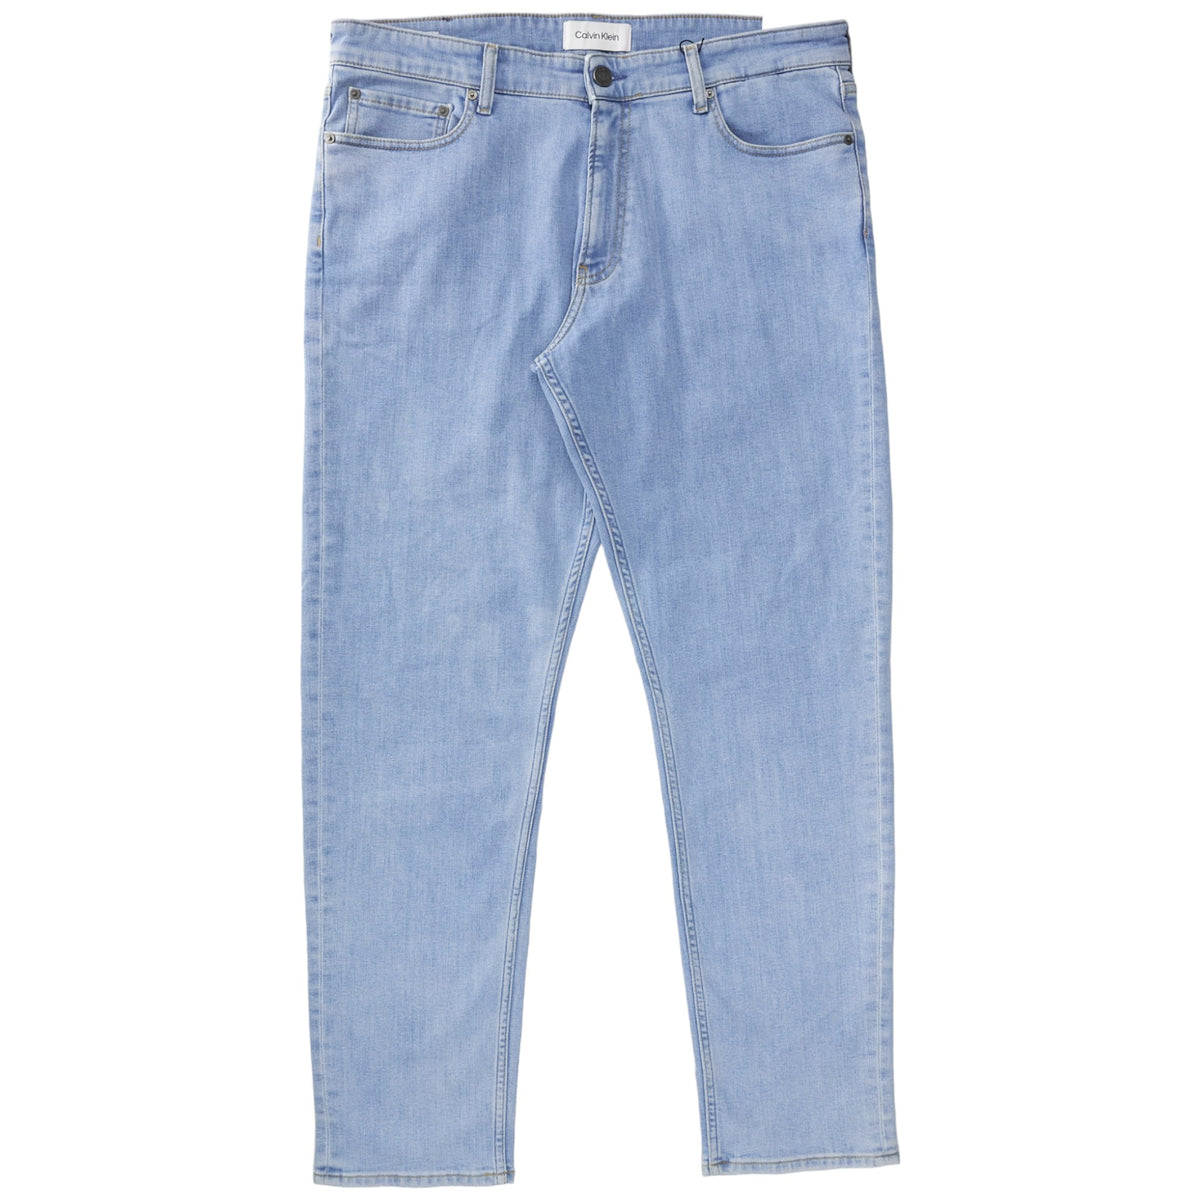 Calvin Klein Light Blue Tapered Stone Wash Jeans